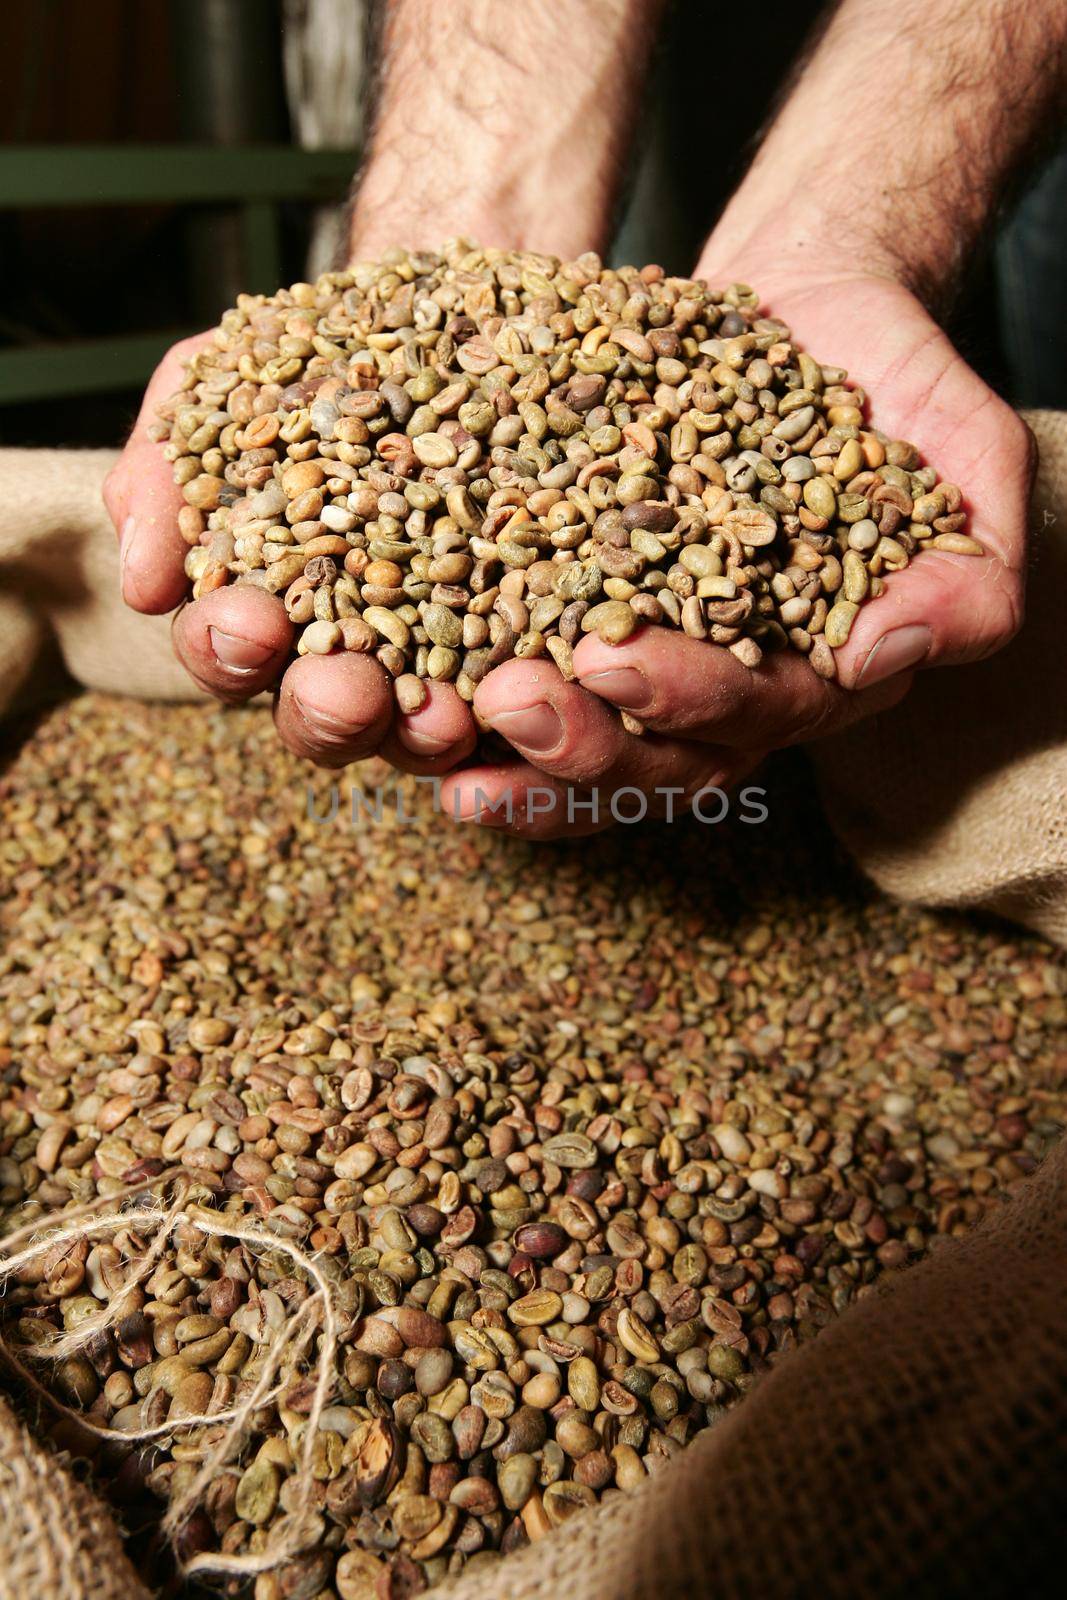 itabela, bahia / brazil - april 23, 2010: processing of coffee beans for export is seen in the city of Itabela.